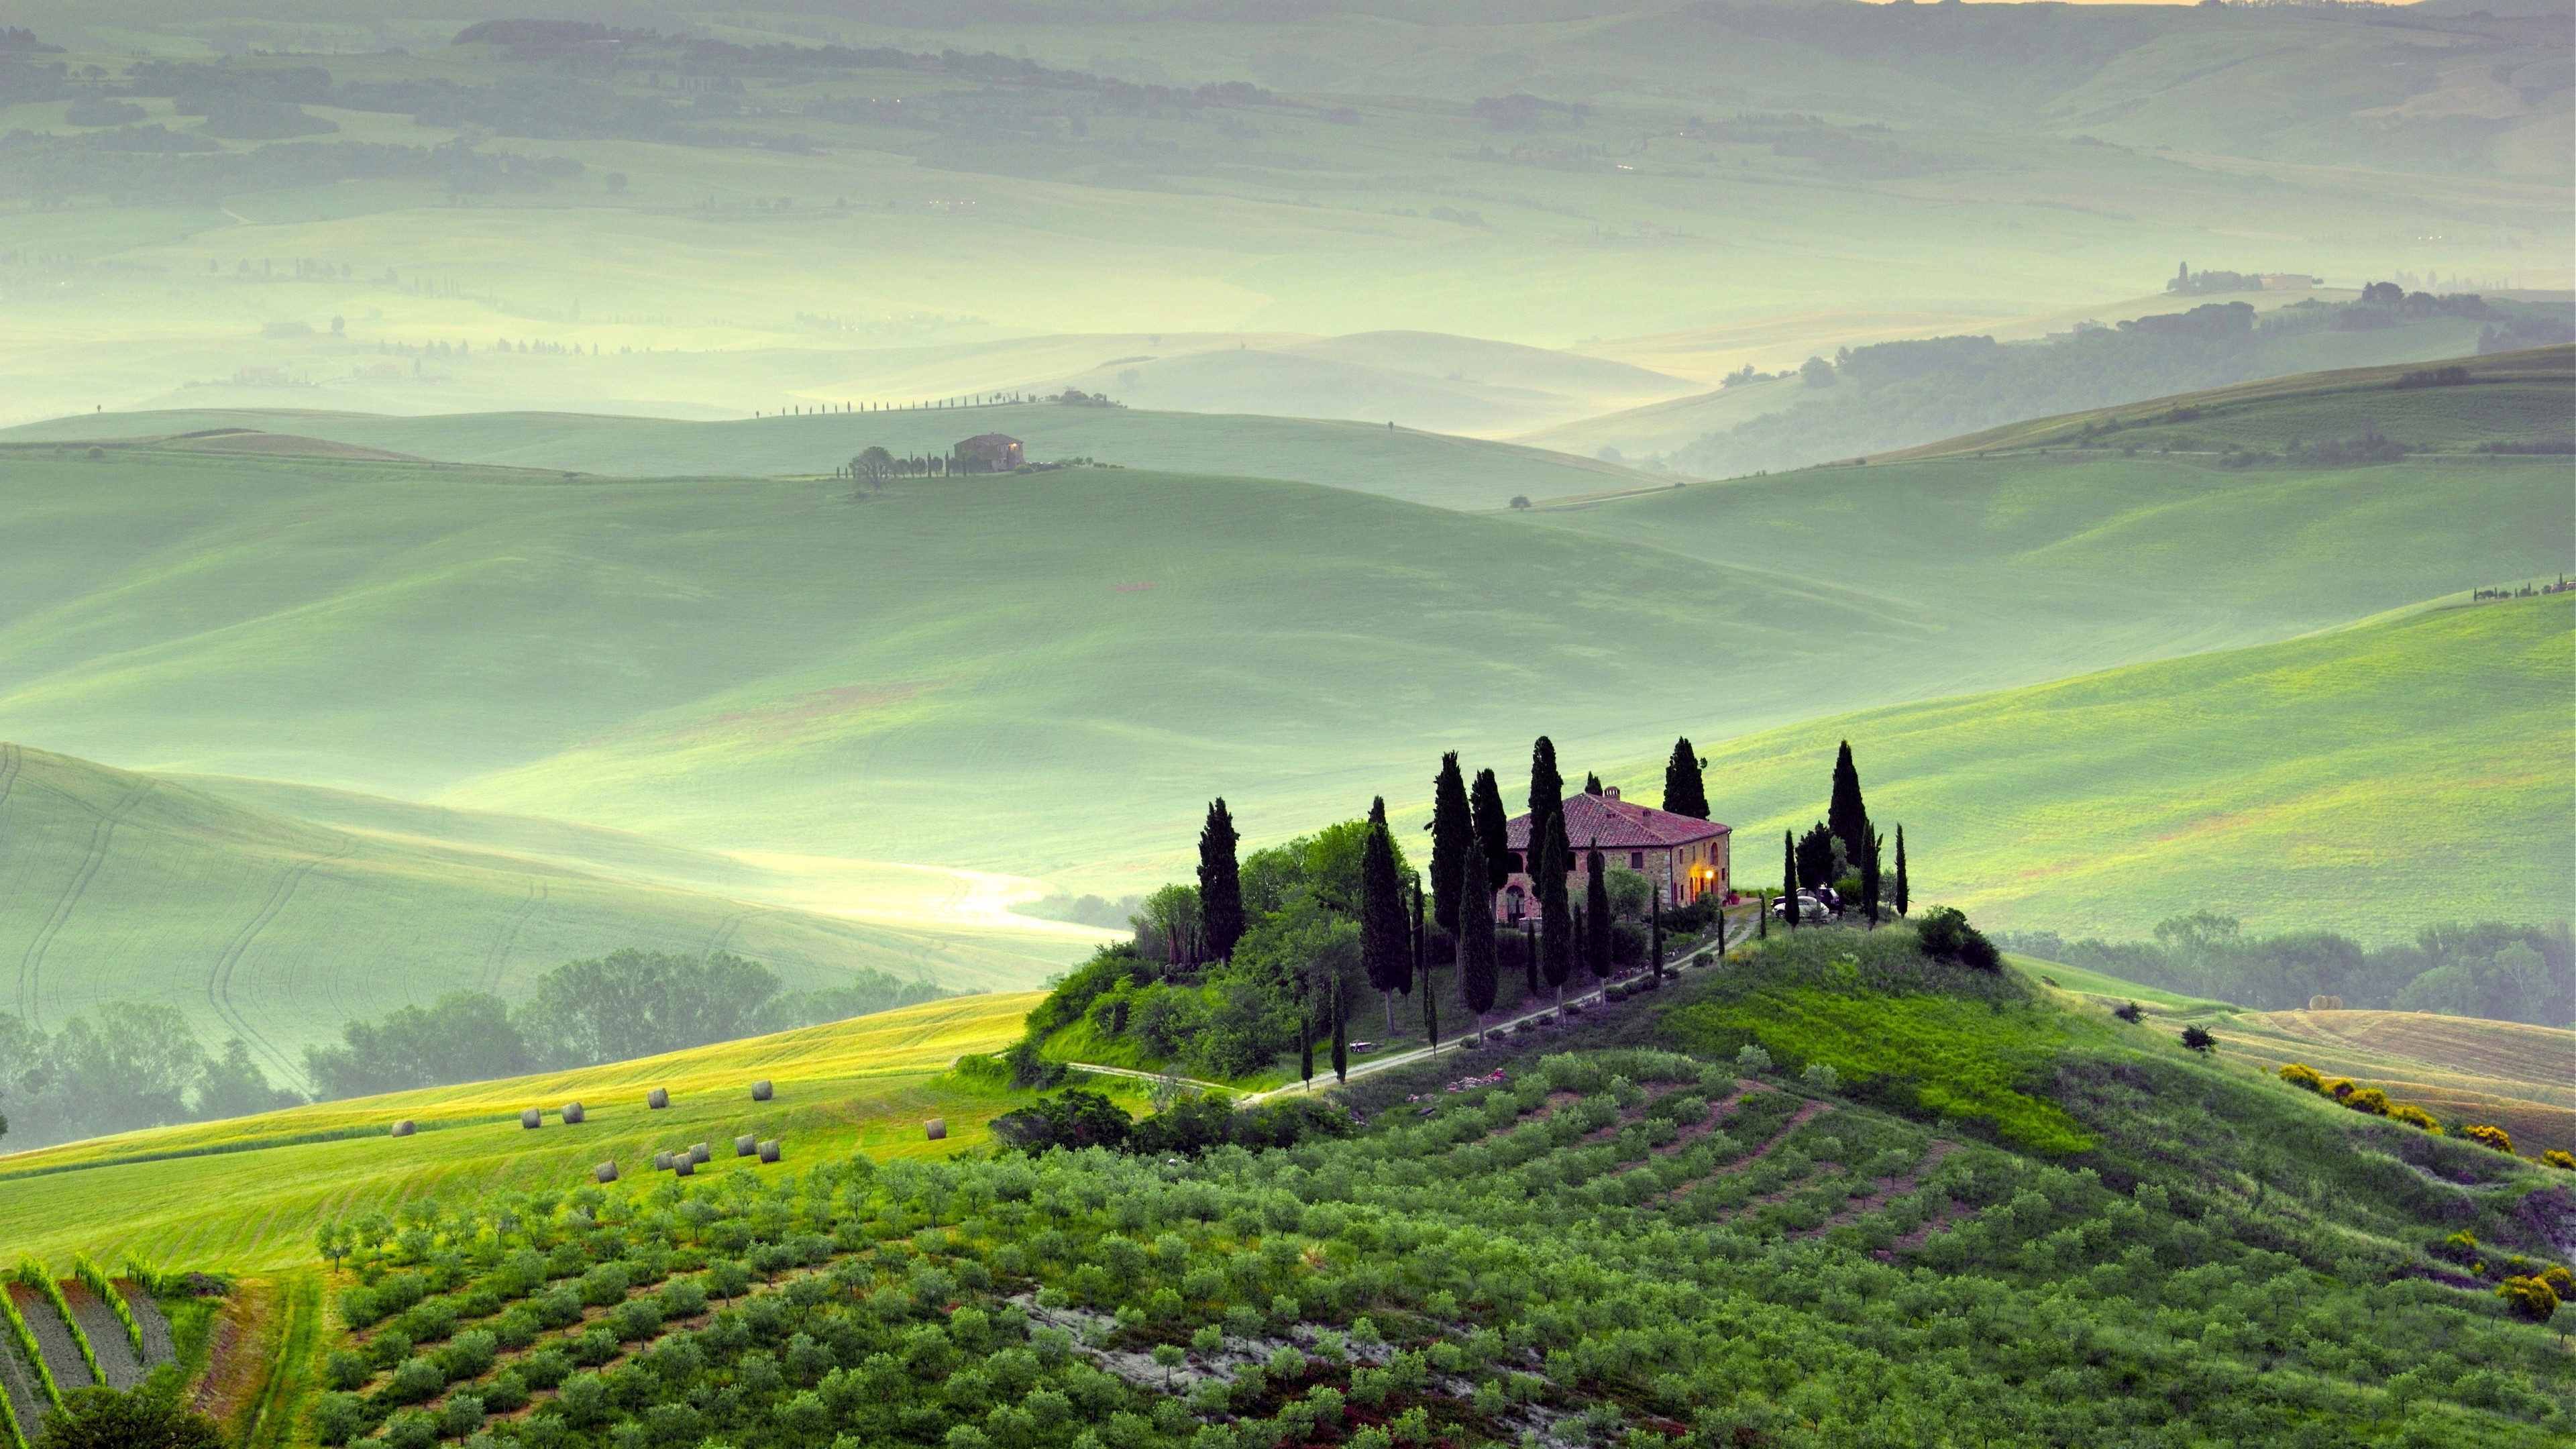 Green Hills: Tuscany region in central Italy, Italian-style country houses surrounded by green fields. 3840x2160 4K Wallpaper.